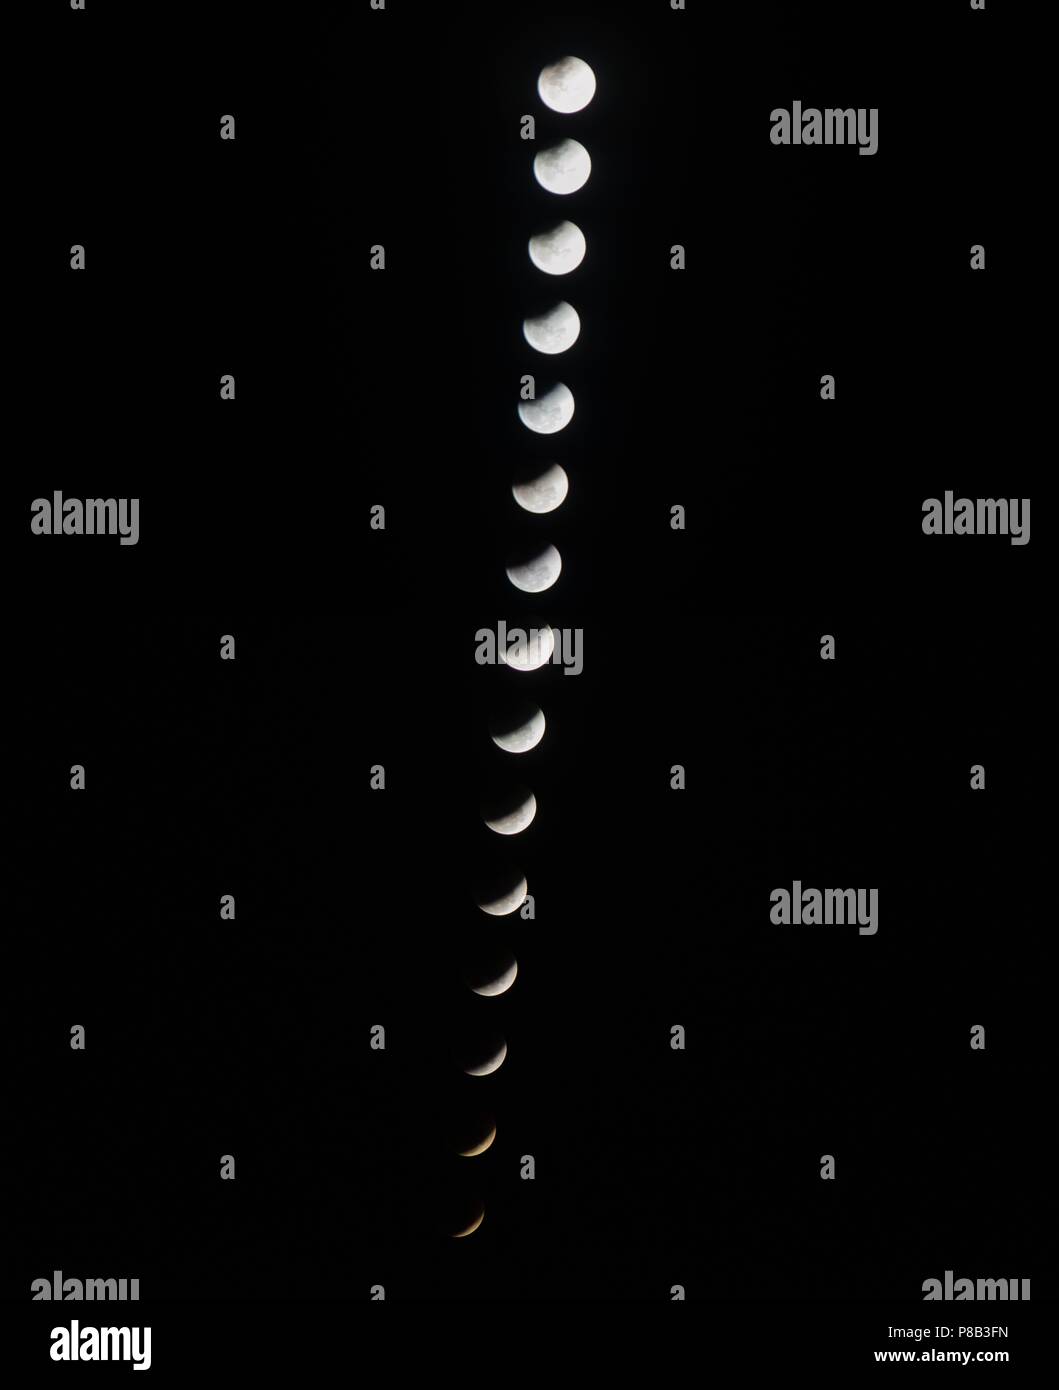 January 31, 2018 total lunar eclipse at moonrise, phases of the moon as seen from Goa, India. Stock Photo